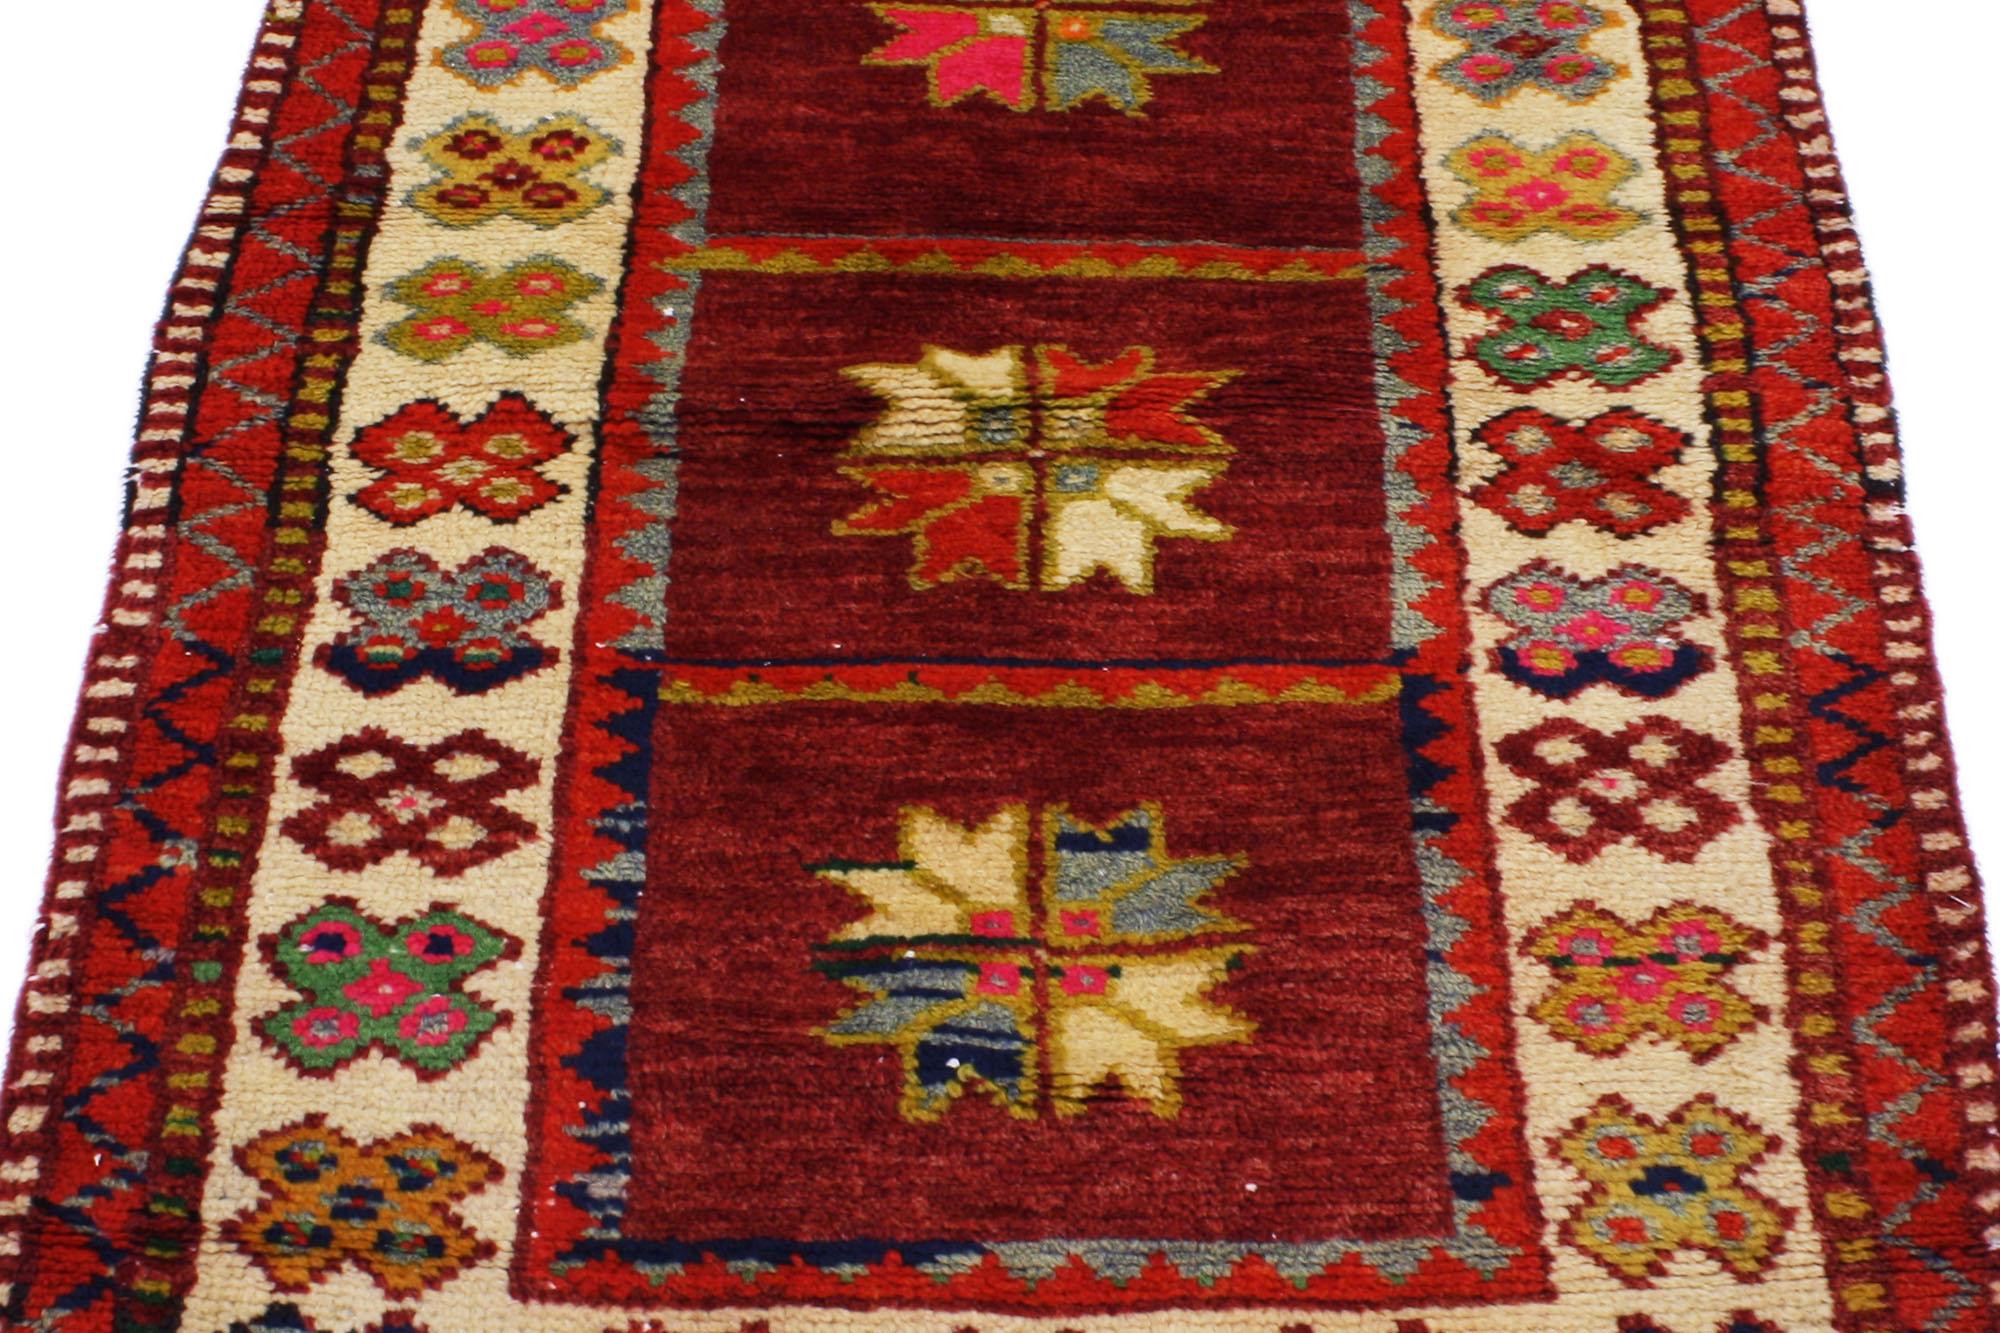 Vintage Turkish Oushak Rug, Colorfully Curated Meets Whimsical Boho In Good Condition For Sale In Dallas, TX